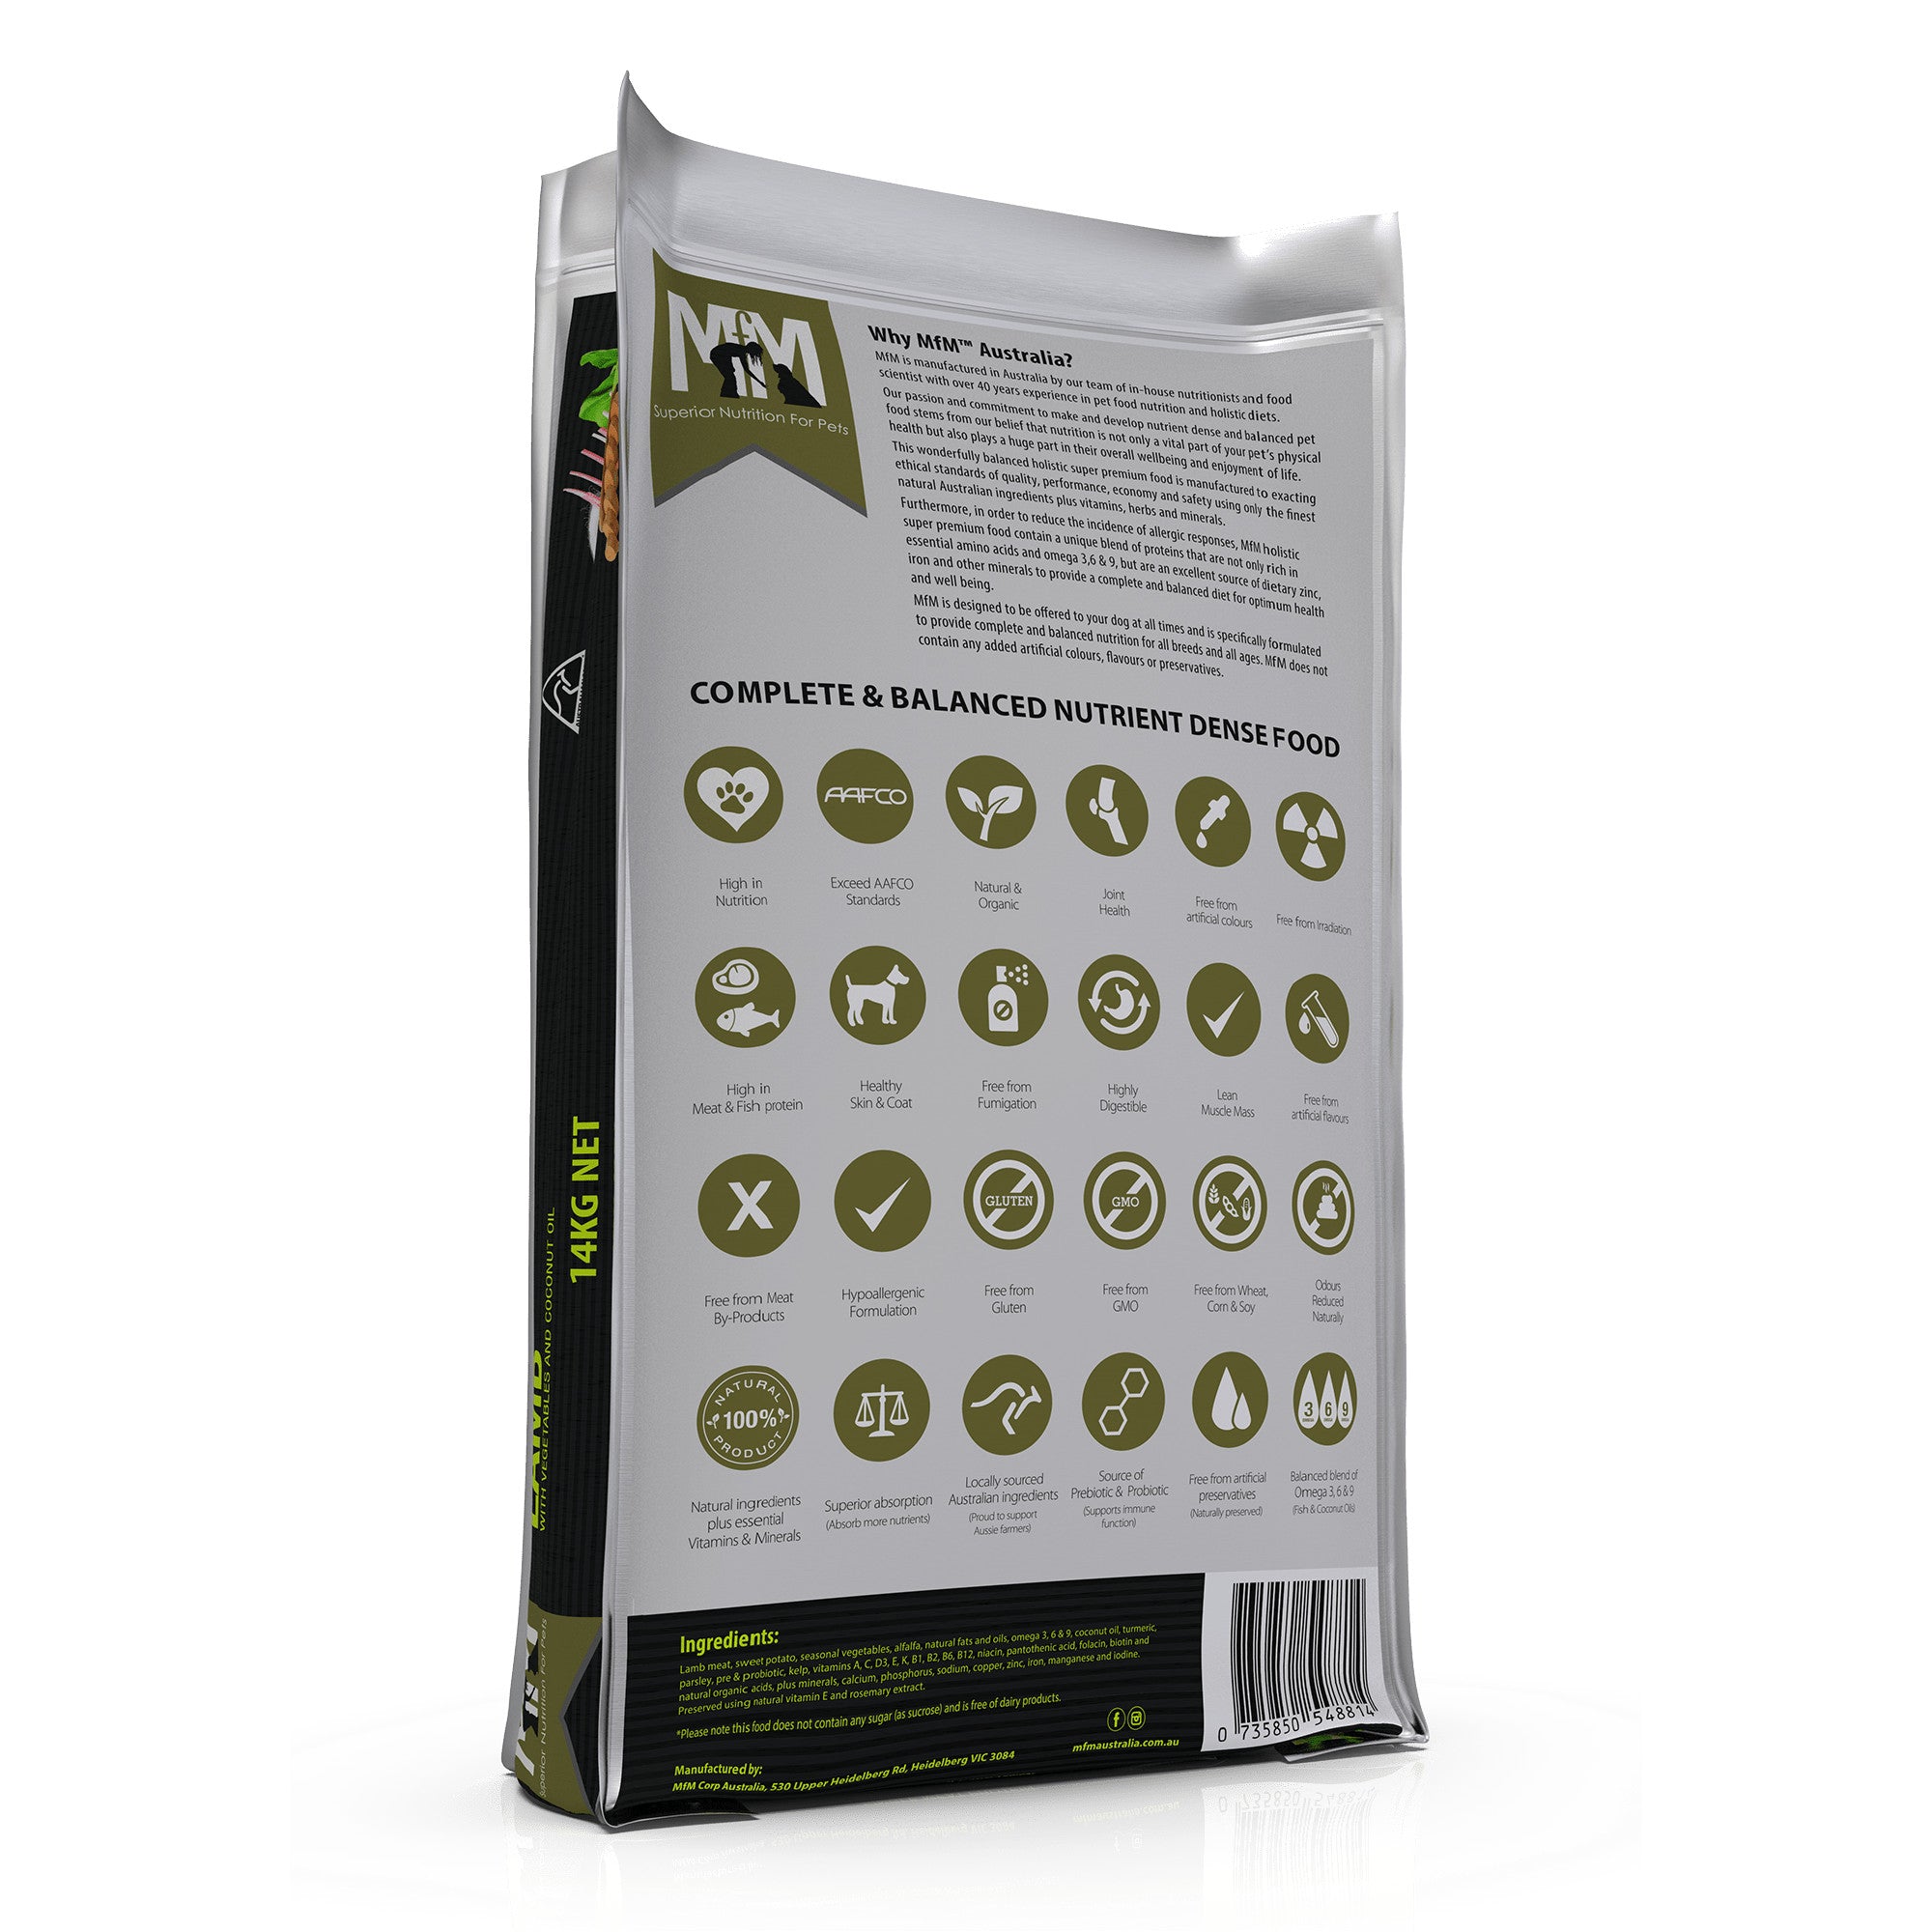 Meals for Mutts Lamb Single Meat Protein Dog Food - Back.